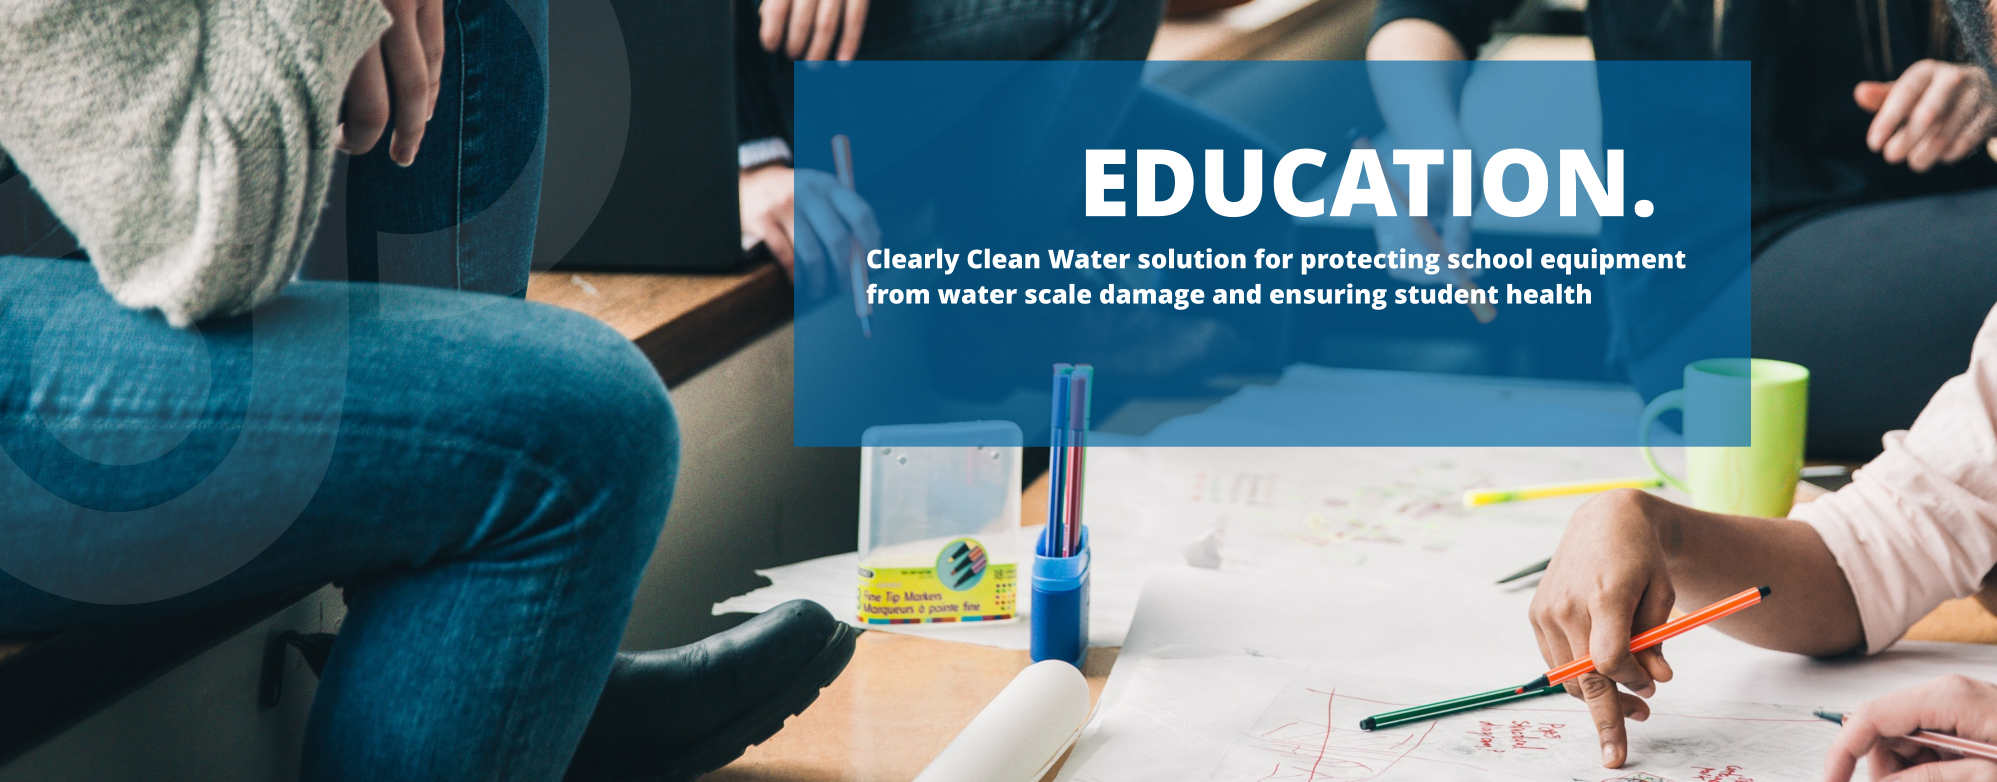 waslix water purification solution education